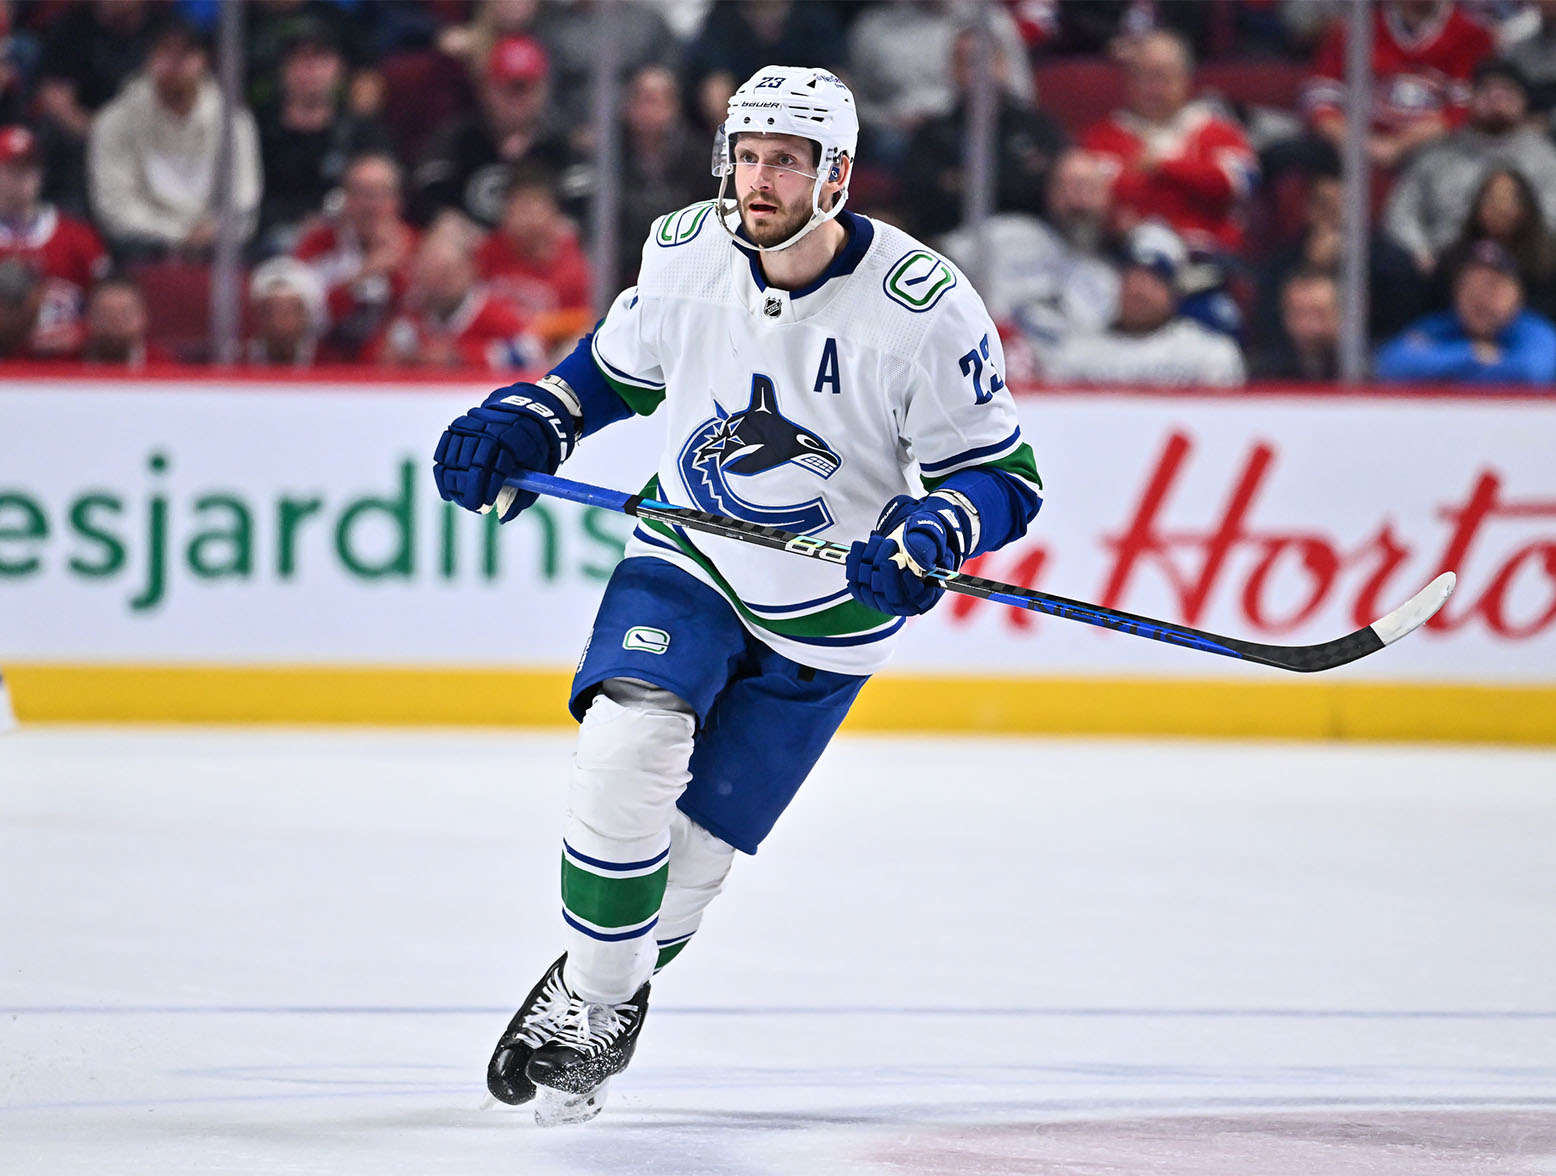 MONTREAL, CANADA - NOVEMBER 09: Oliver Ekman-Larsson #23 of the Vancouver Canucks skates against the Montreal Canadiens during the third period at Centre Bell on November 9, 2022 in Montreal, Quebec, Canada. The Montreal Canadiens defeated the Vancouver Canucks 5-2. (Photo by Minas Panagiotakis/Getty Images)